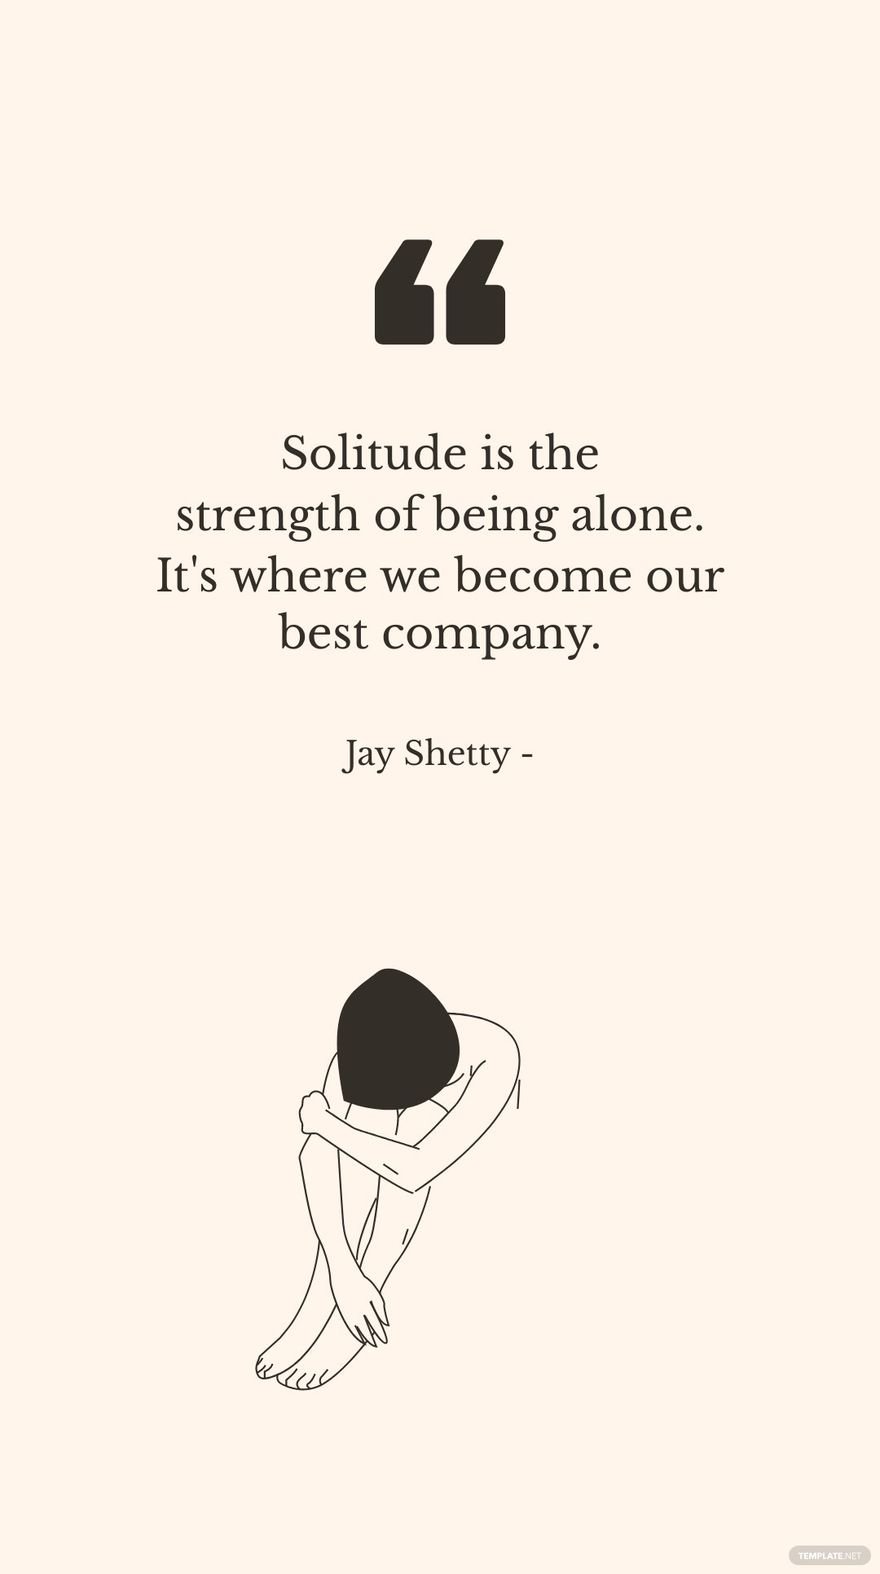 Jay Shetty - Solitude is the strength of being alone. It's where we become our best company.